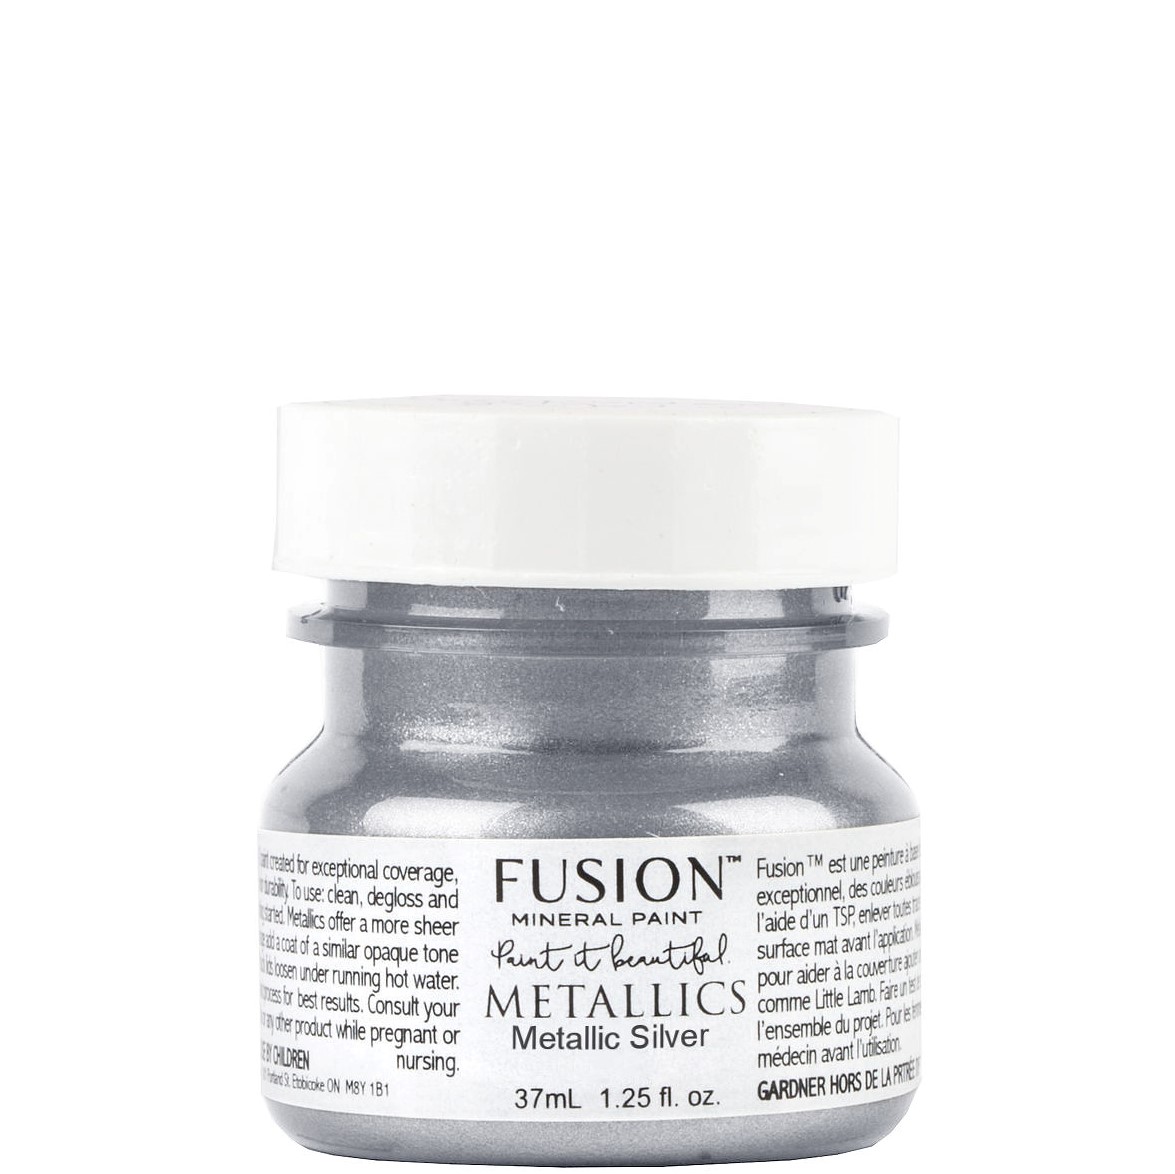 Silver Fusion Mineral Paint Goed Gestyled Brielle